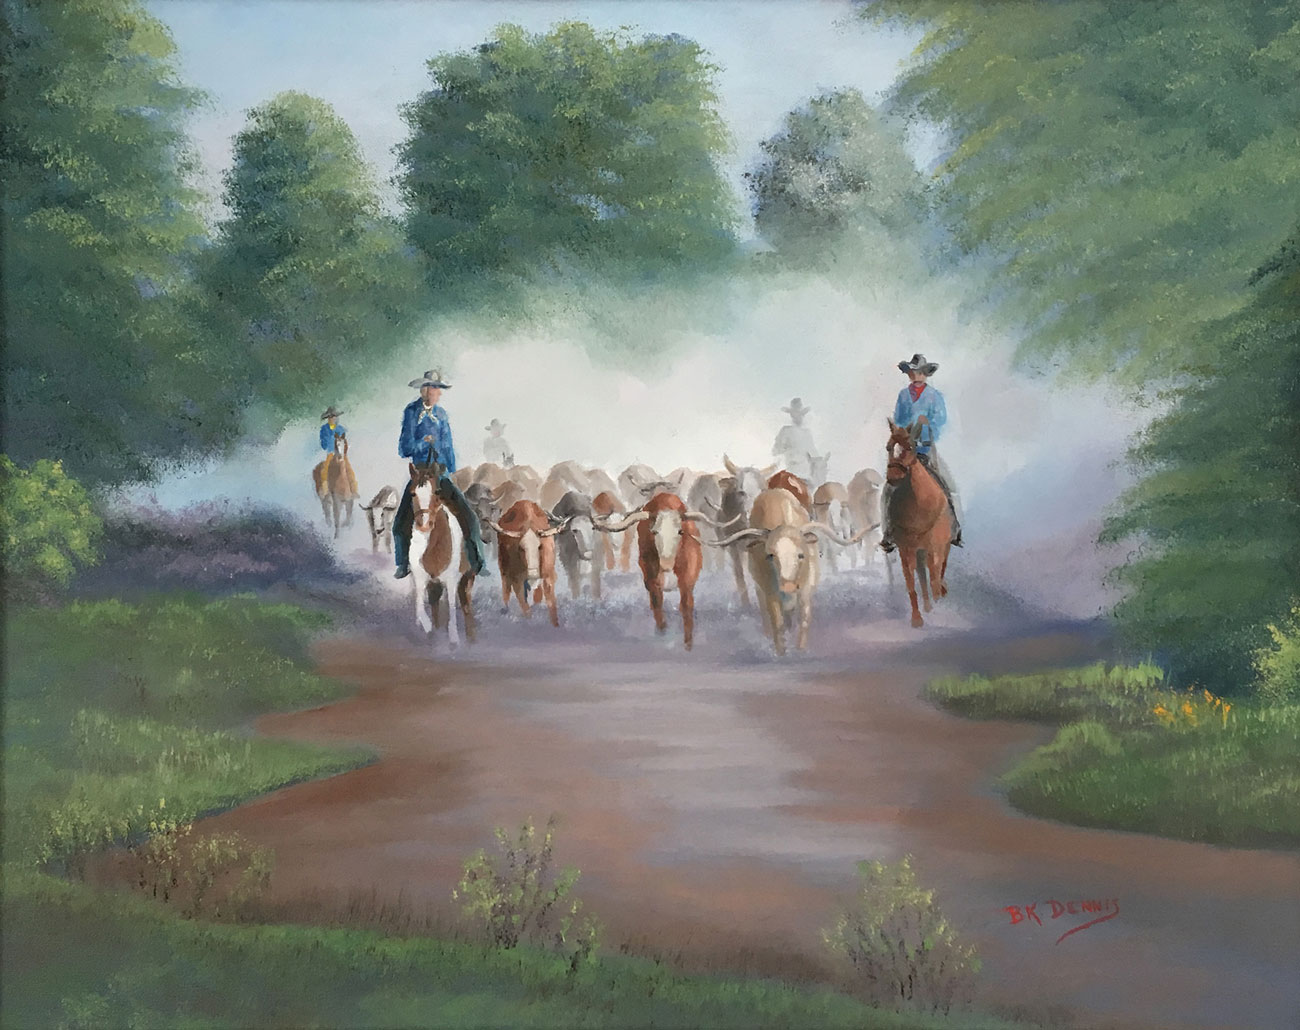 An oil painting of an approaching herd of cattle with mounted cowboys surrounding the group. Painted by B.K. Dennis of Alpine, TX.